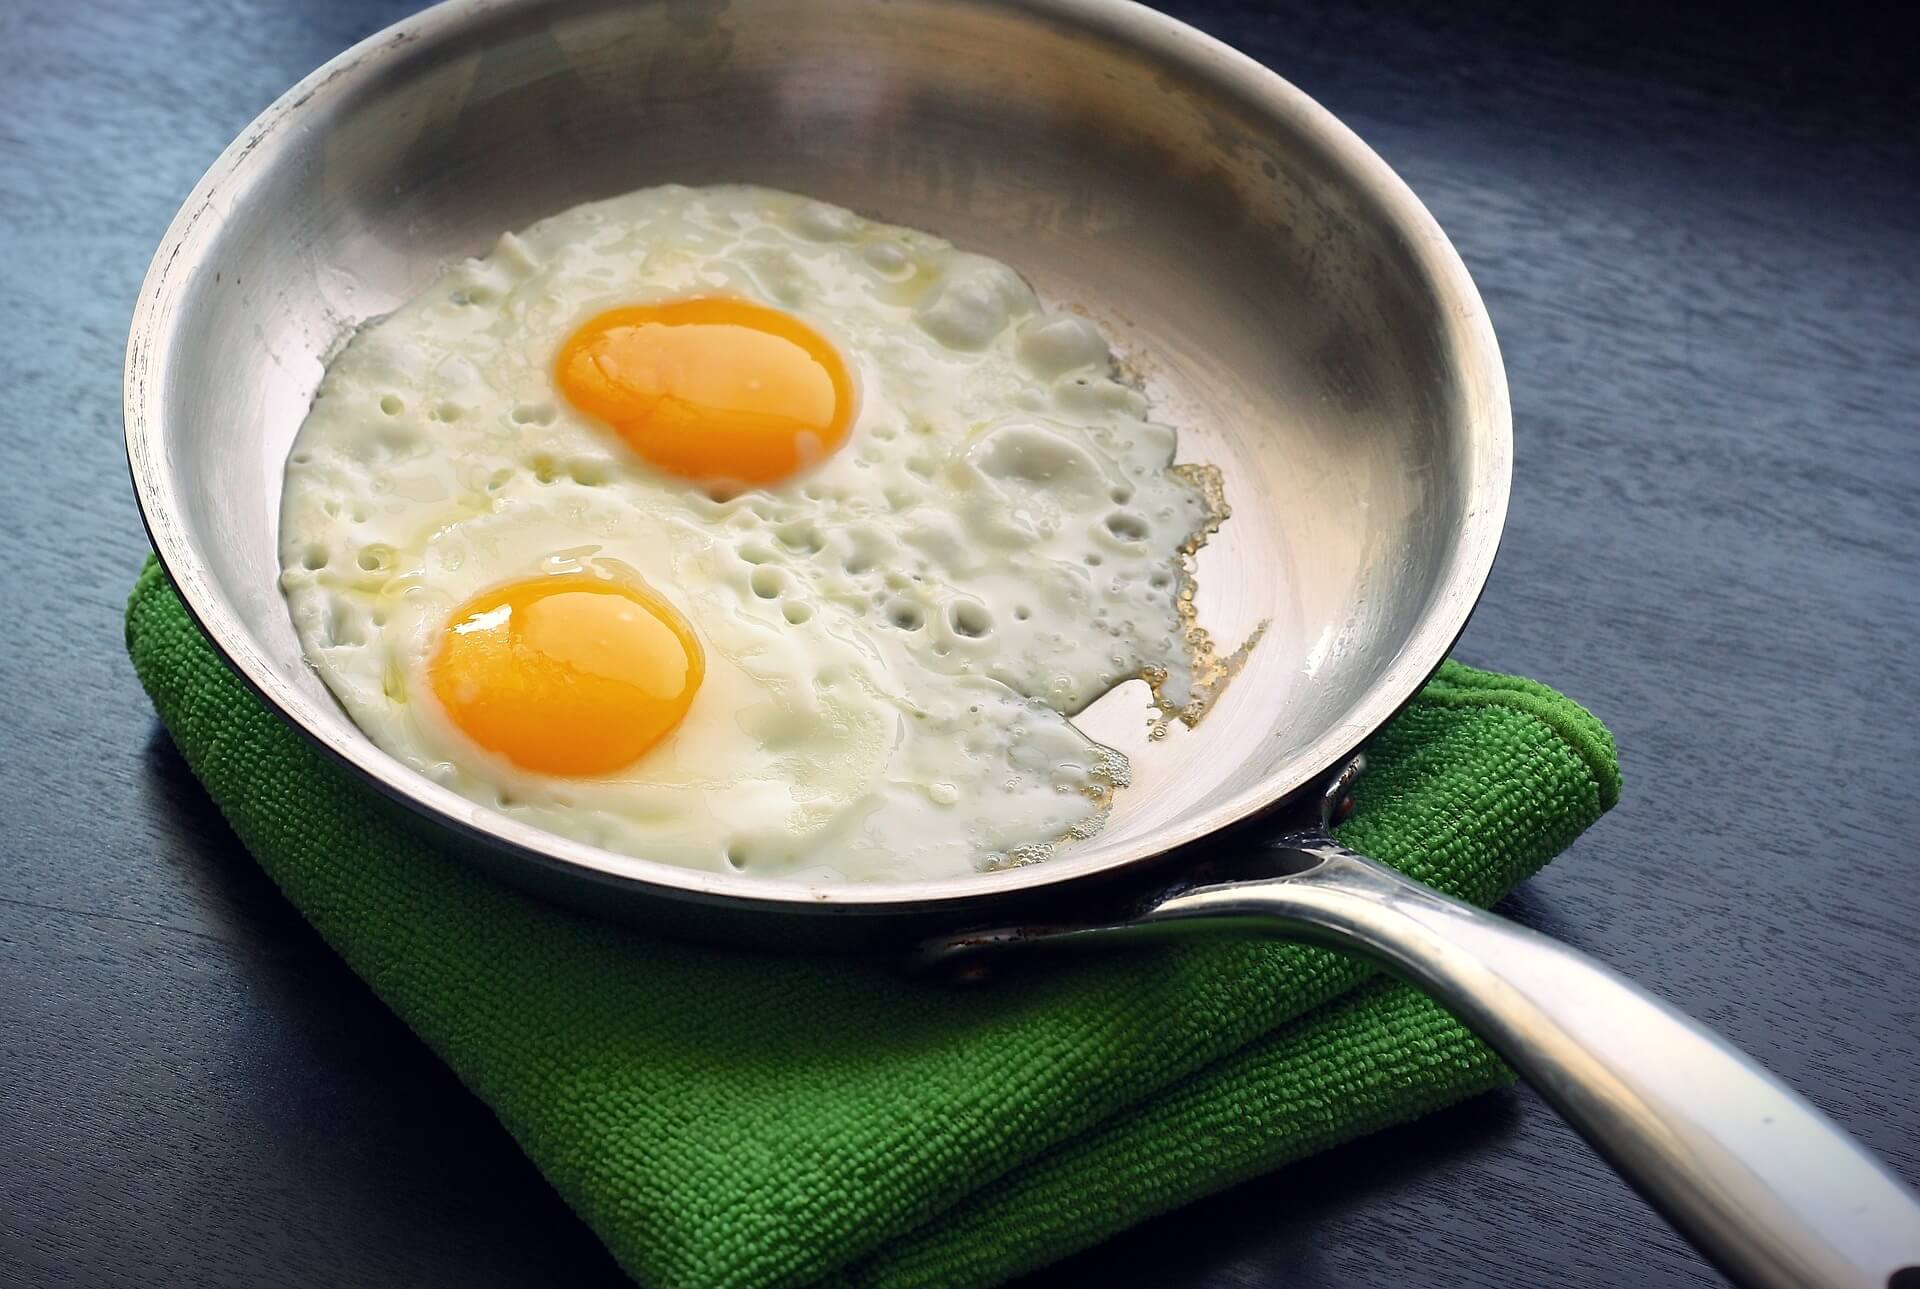 Cooking Eggs in a Stainless Steel Pan